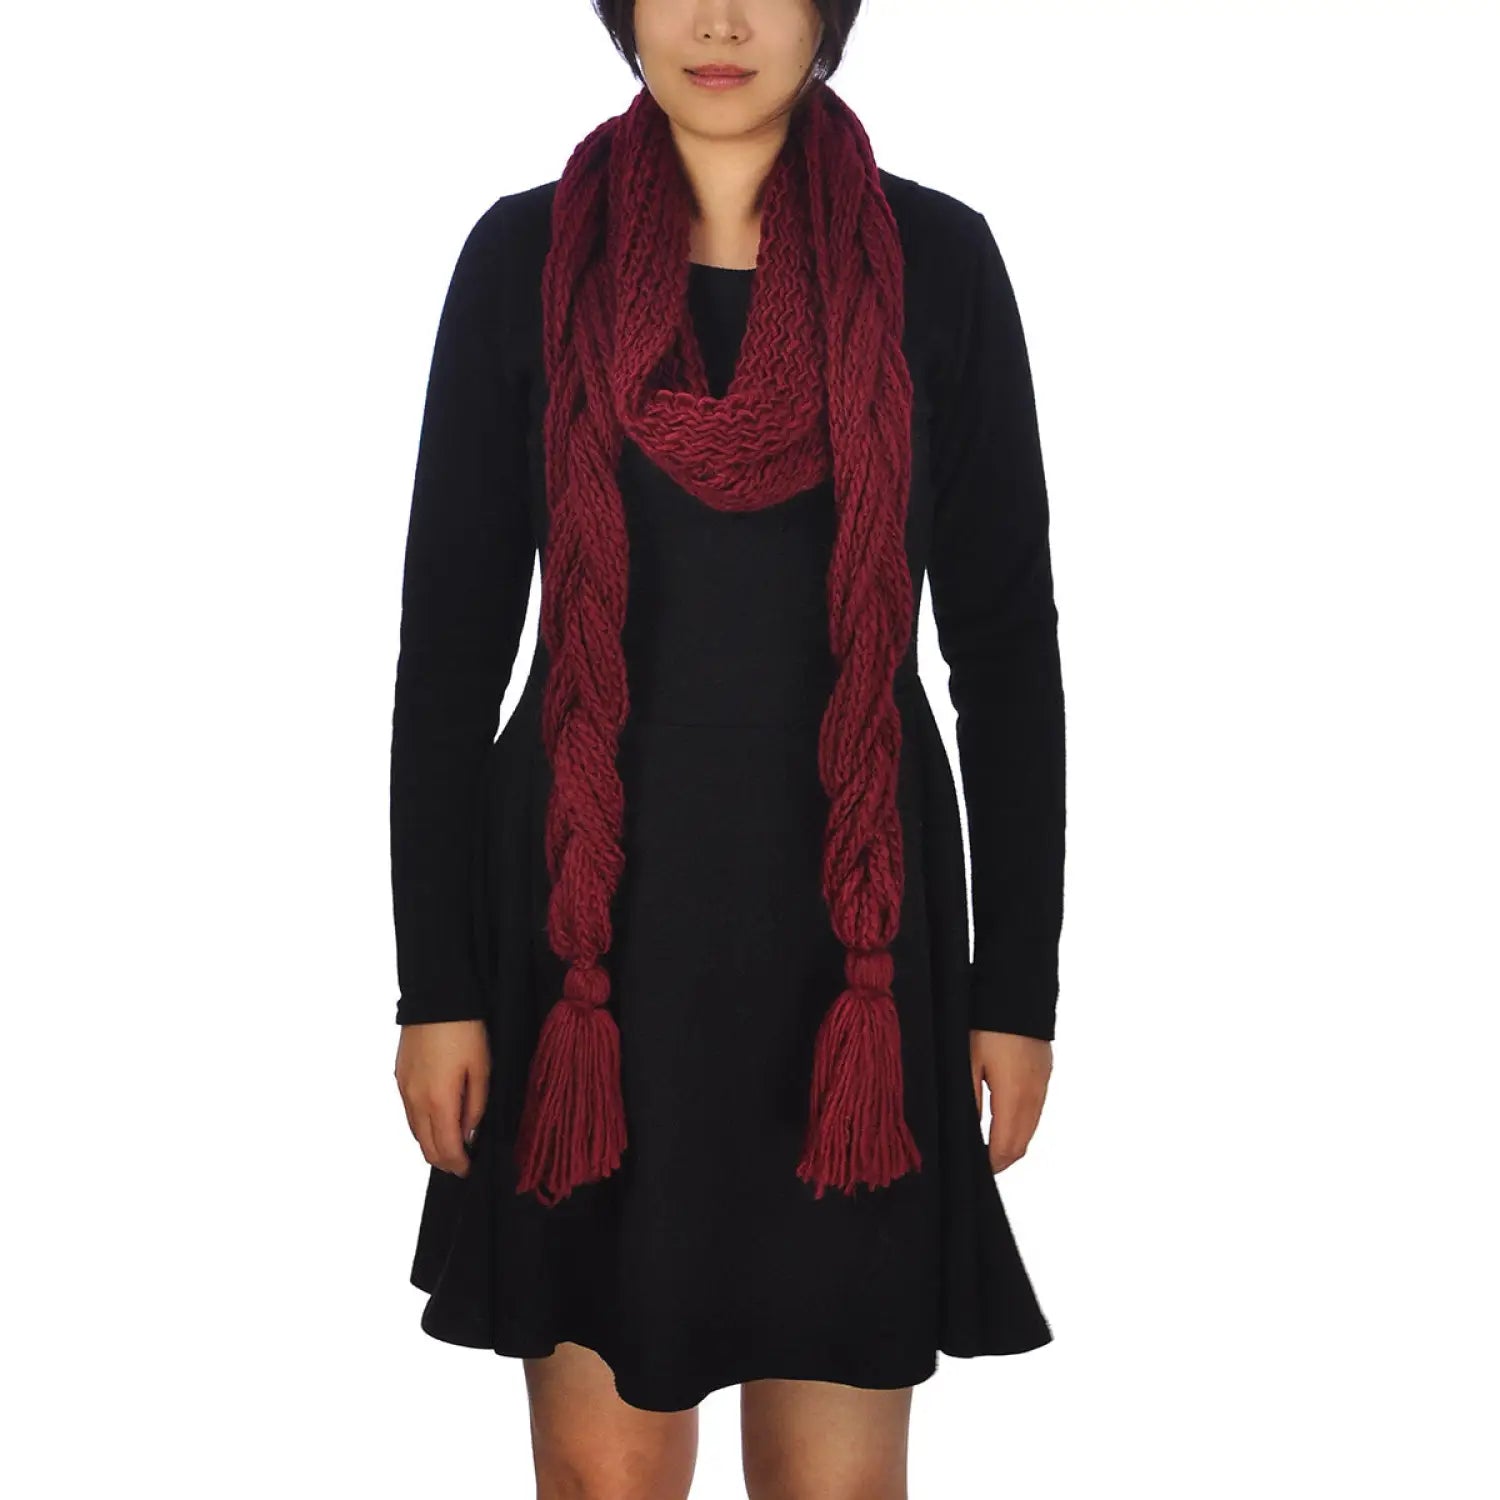 Fashionable woman in black dress and red plait knitted scarf